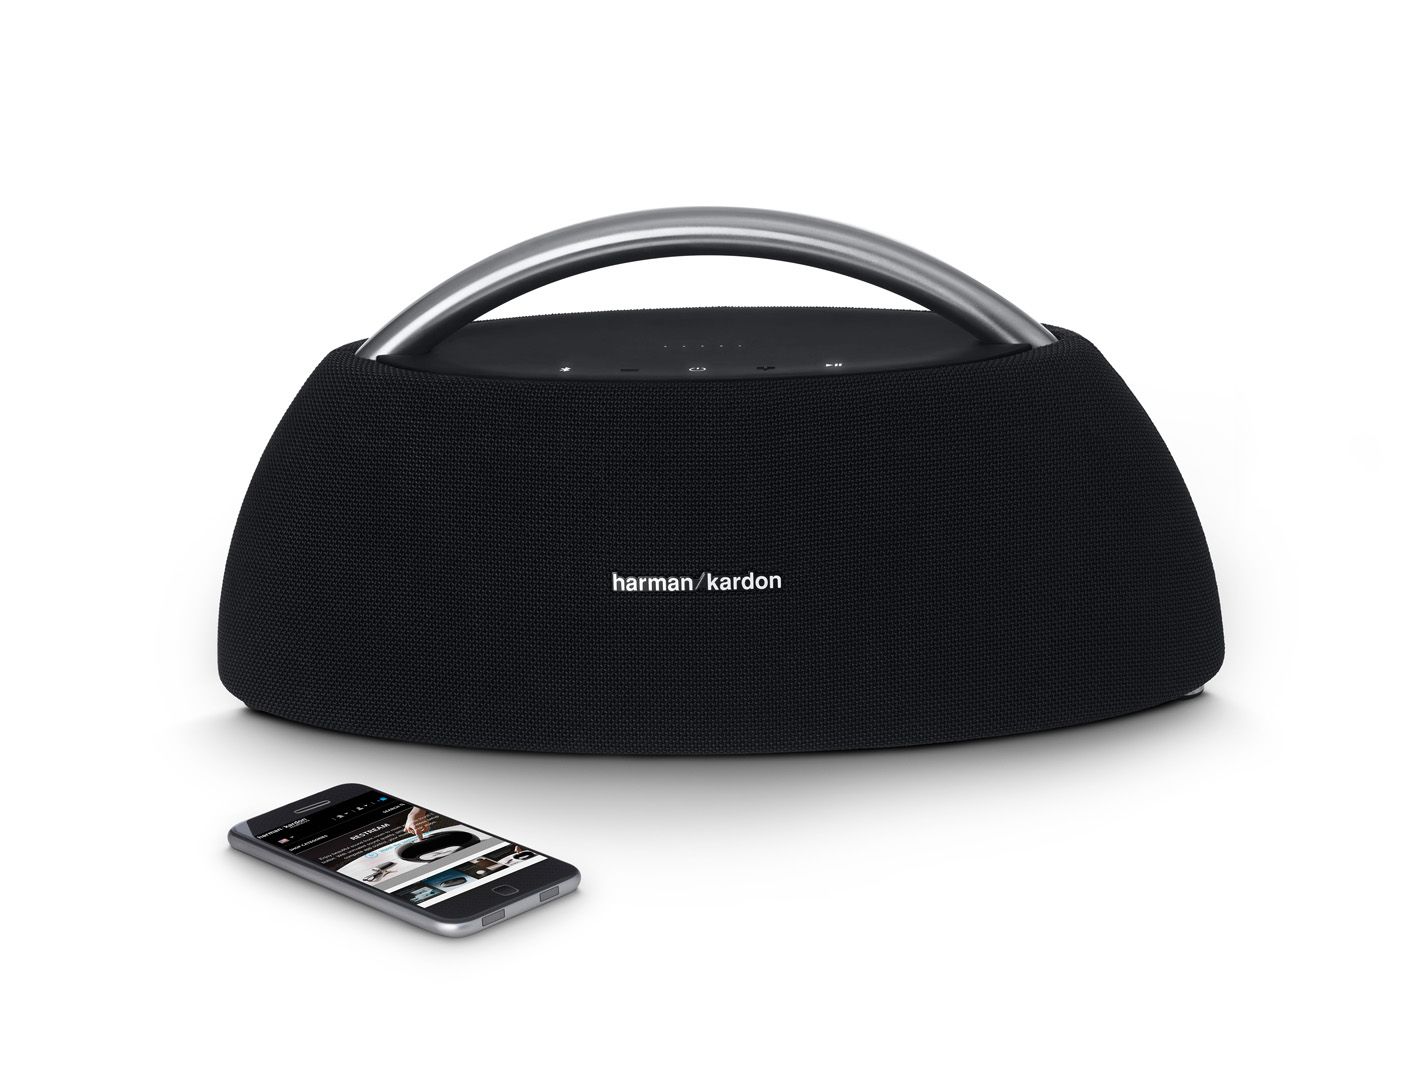 harman kardon go play shows there s still interest in quality bluetooth speakers image 1